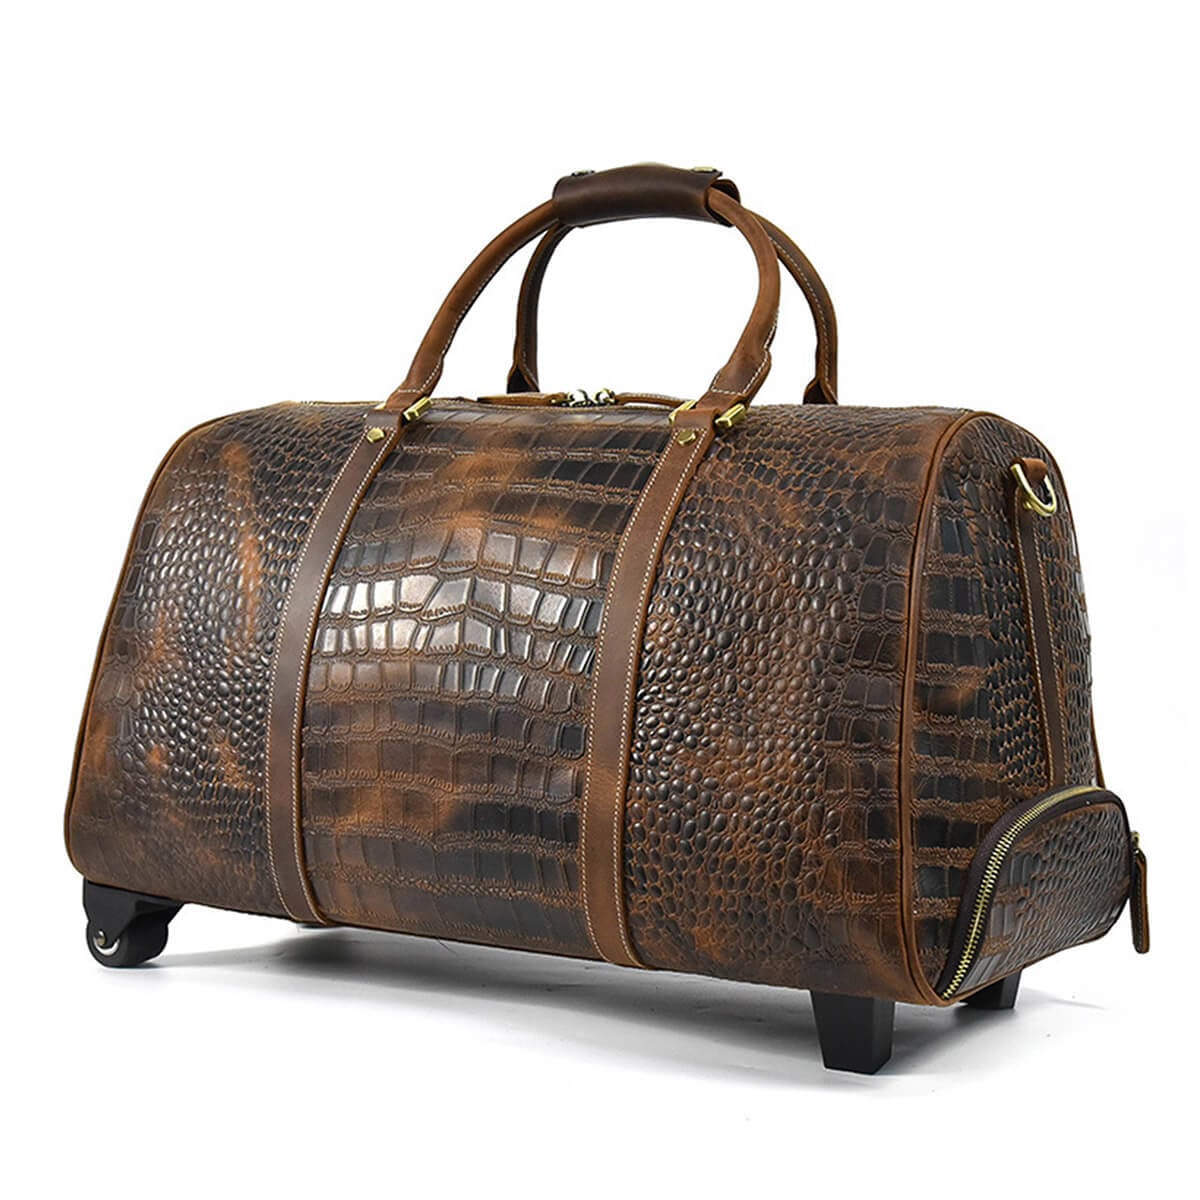 Genuine Leather Travel Luggage Rolling Duffle Bag